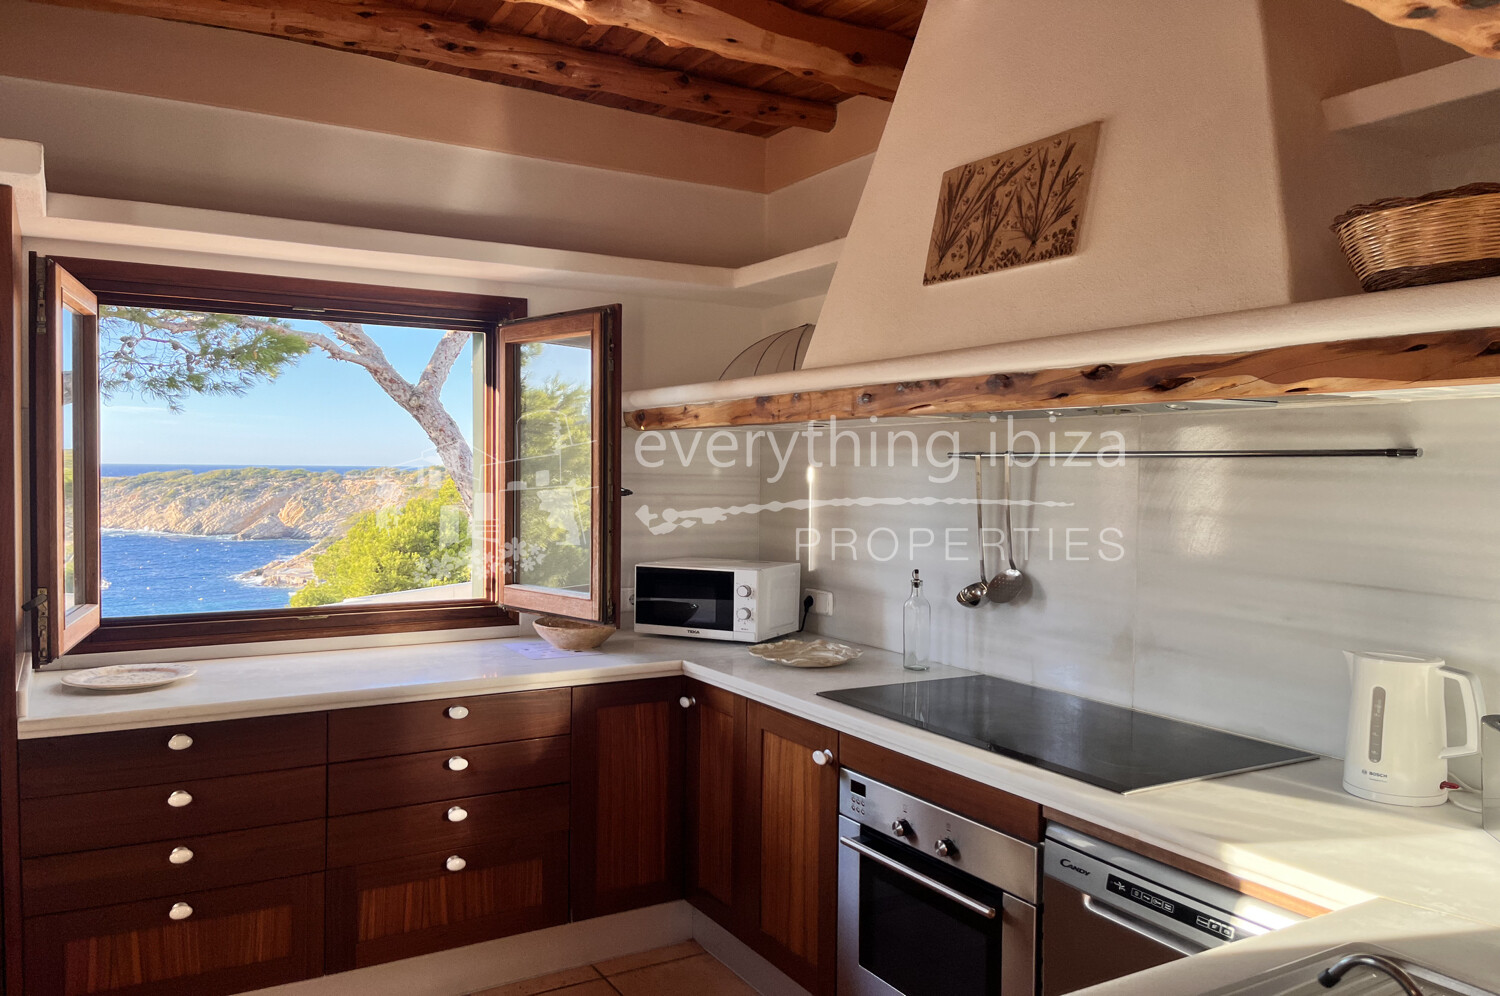 Villa with Tourist License Enjoying Fantastic Sea and Sunset Views in Cala Vadella, ref. 1639, for sale in Ibiza by everything ibiza Properties